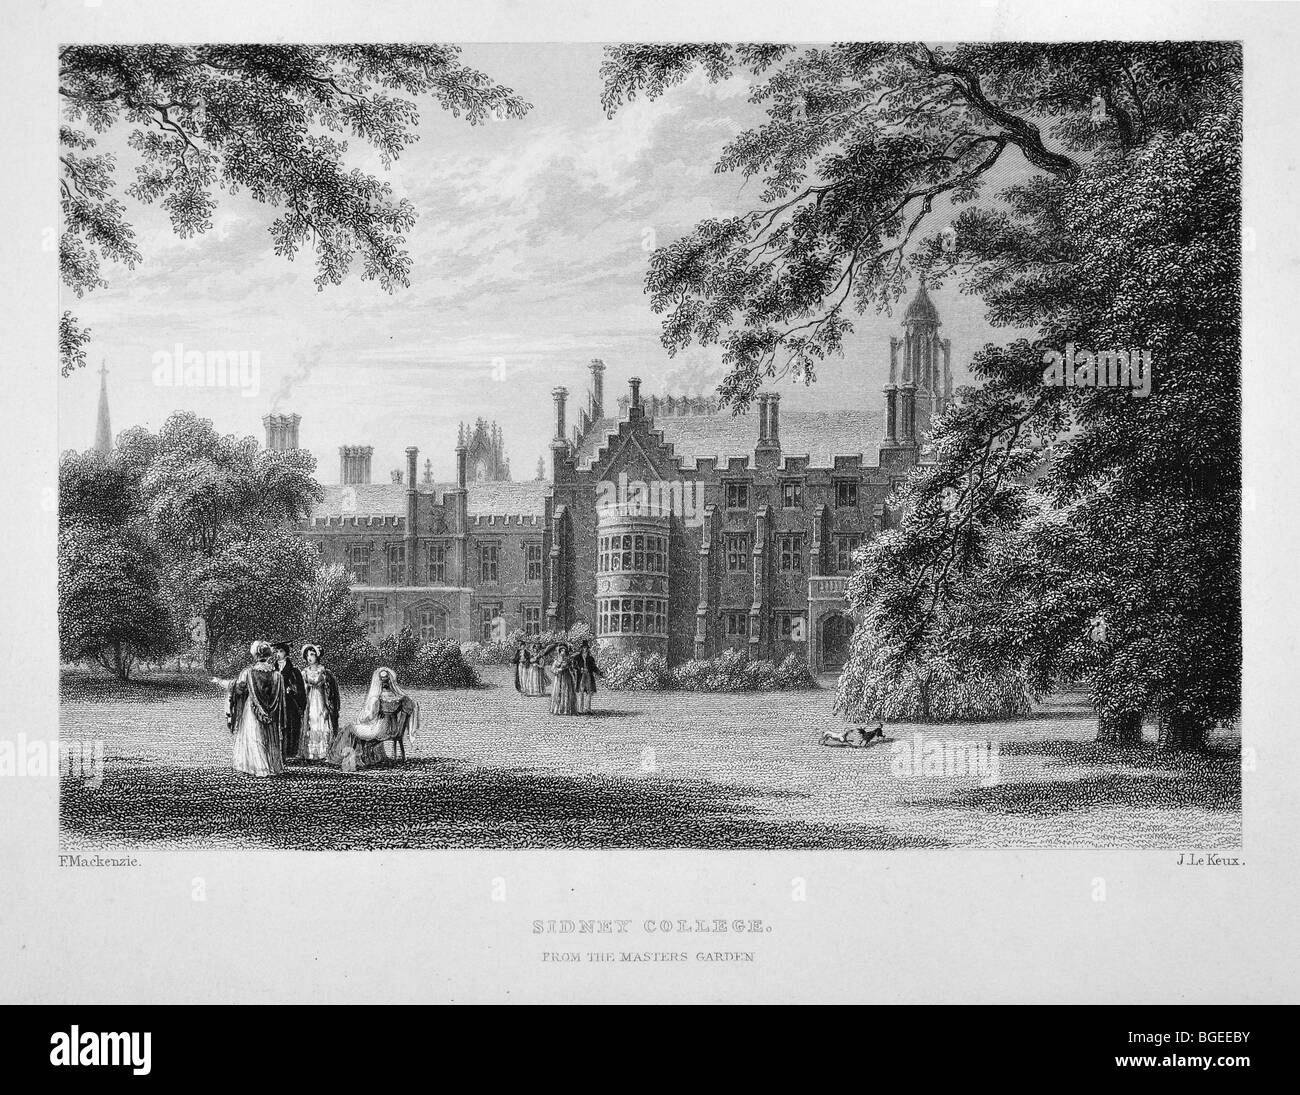 Sussex university view Black and White Stock Photos & Images - Alamy